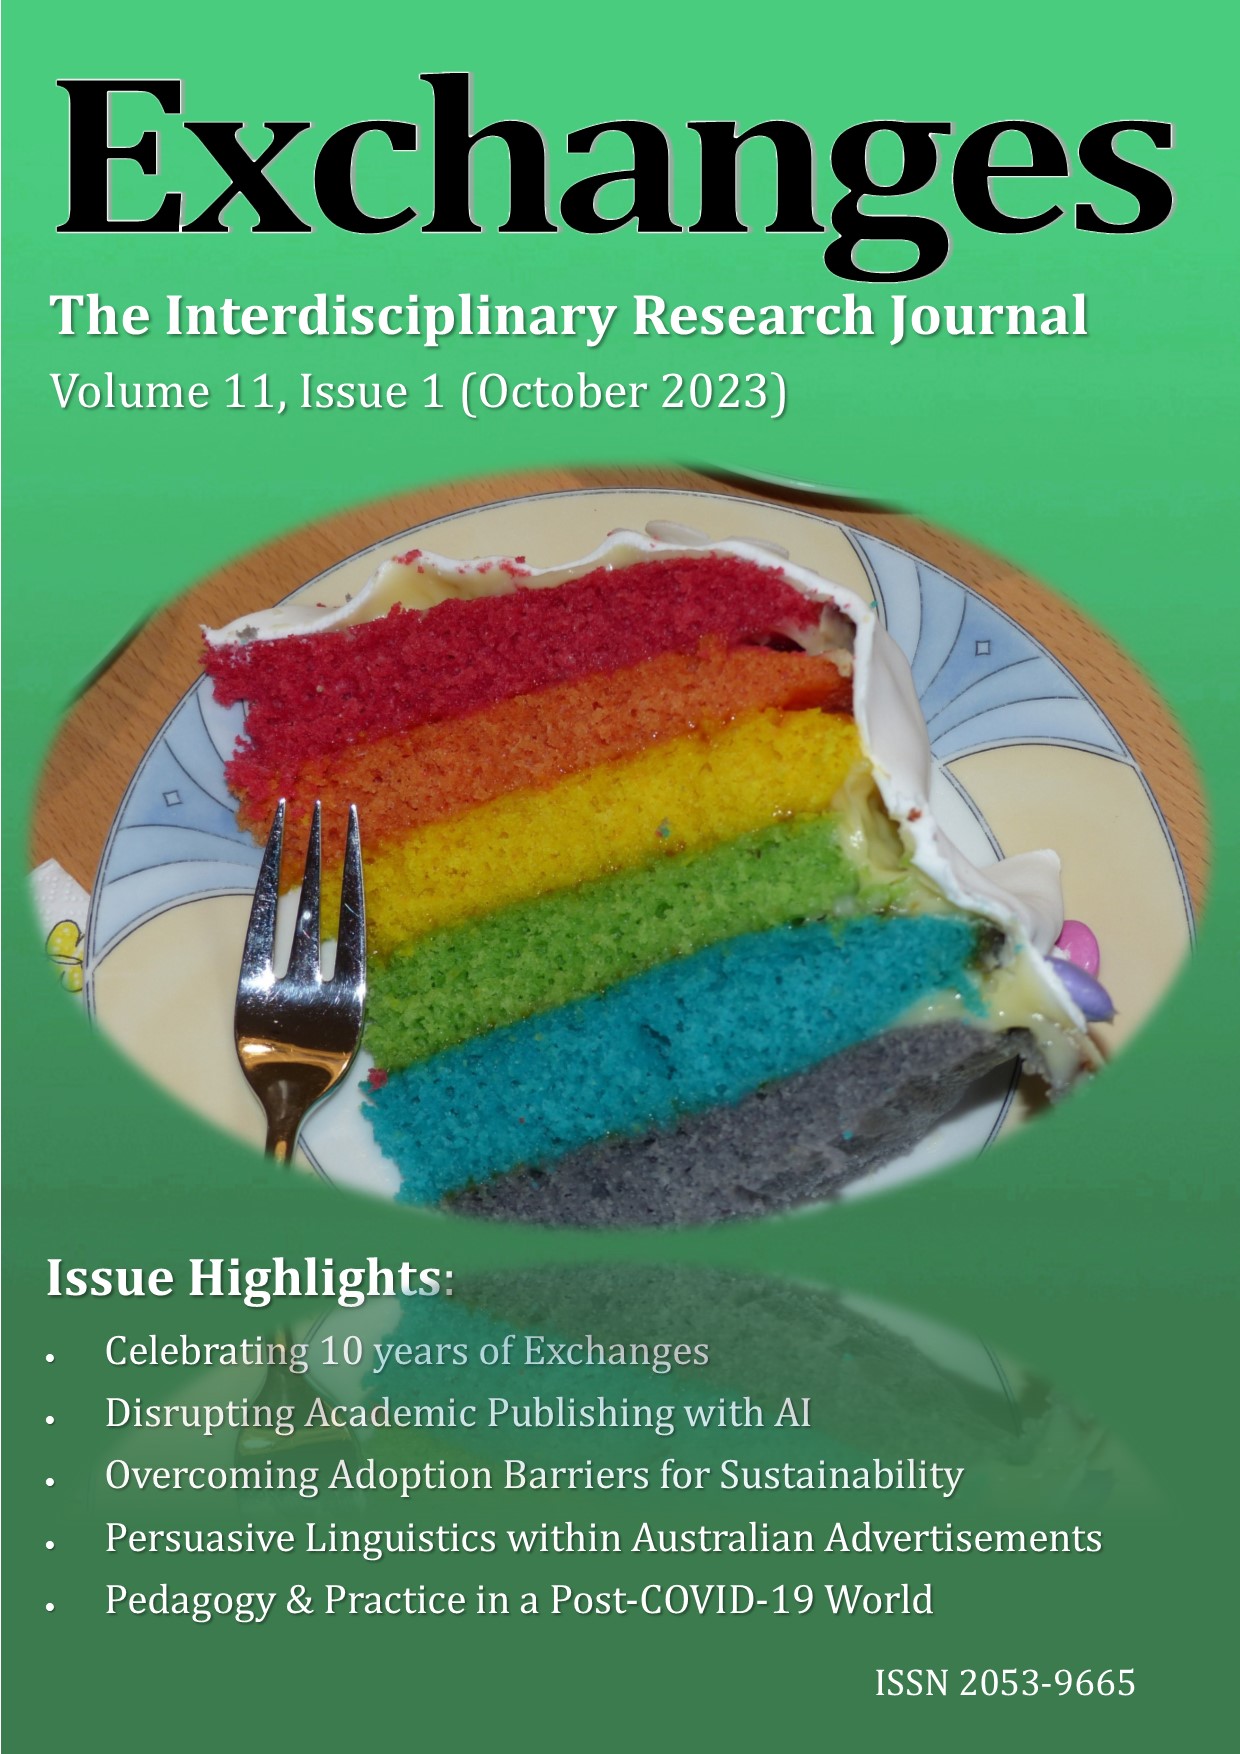 Cover for issue 11.1, featuring a picture of rainbow cake